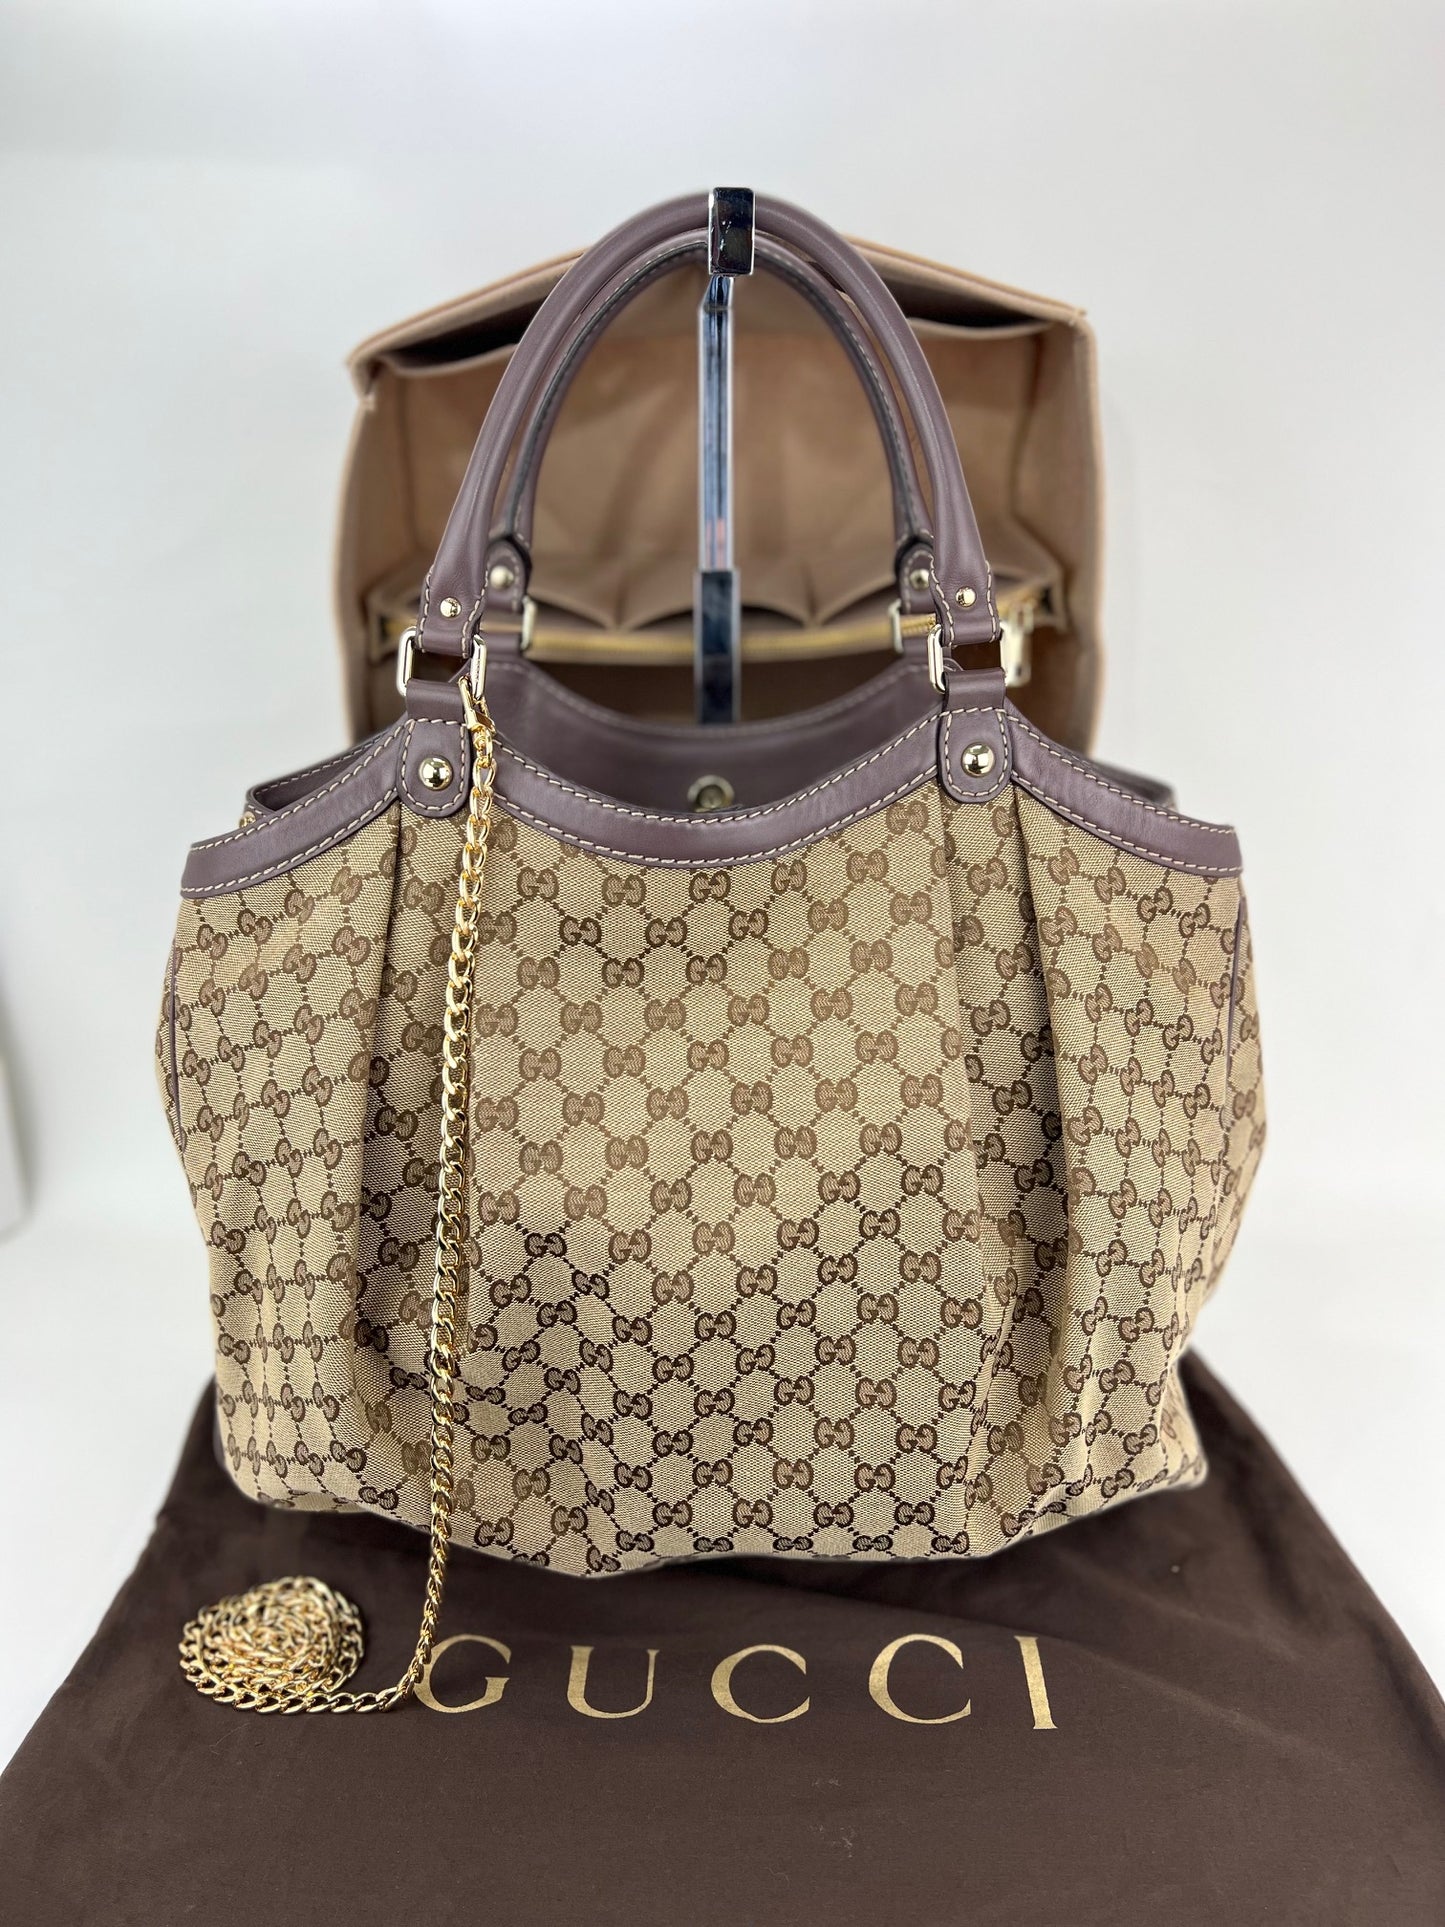 Vintage Gucci Sukey Brown GG Monogram Large Canvas Tote Bag Leather Handles